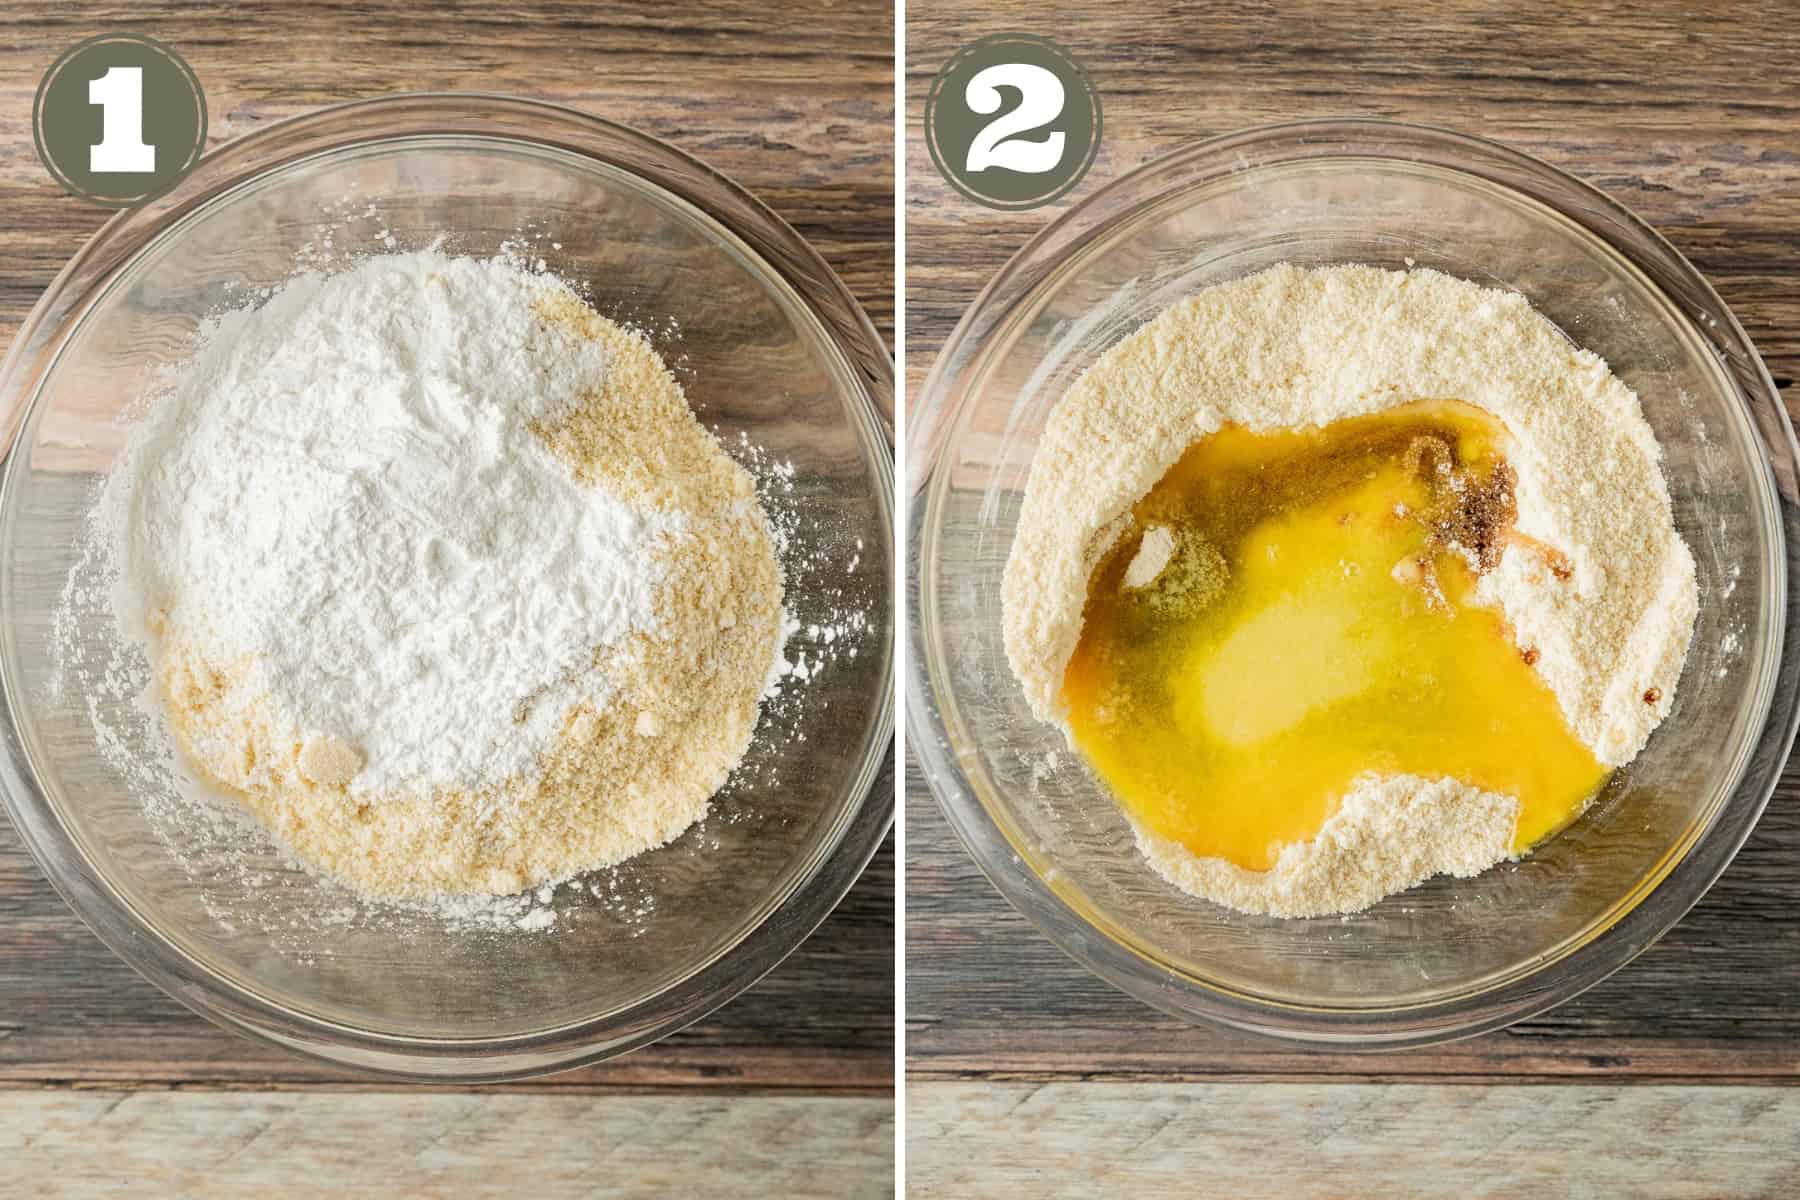 Side by side process shots for shortbread cookies including mixing dry ingredients and adding wet ingredients.